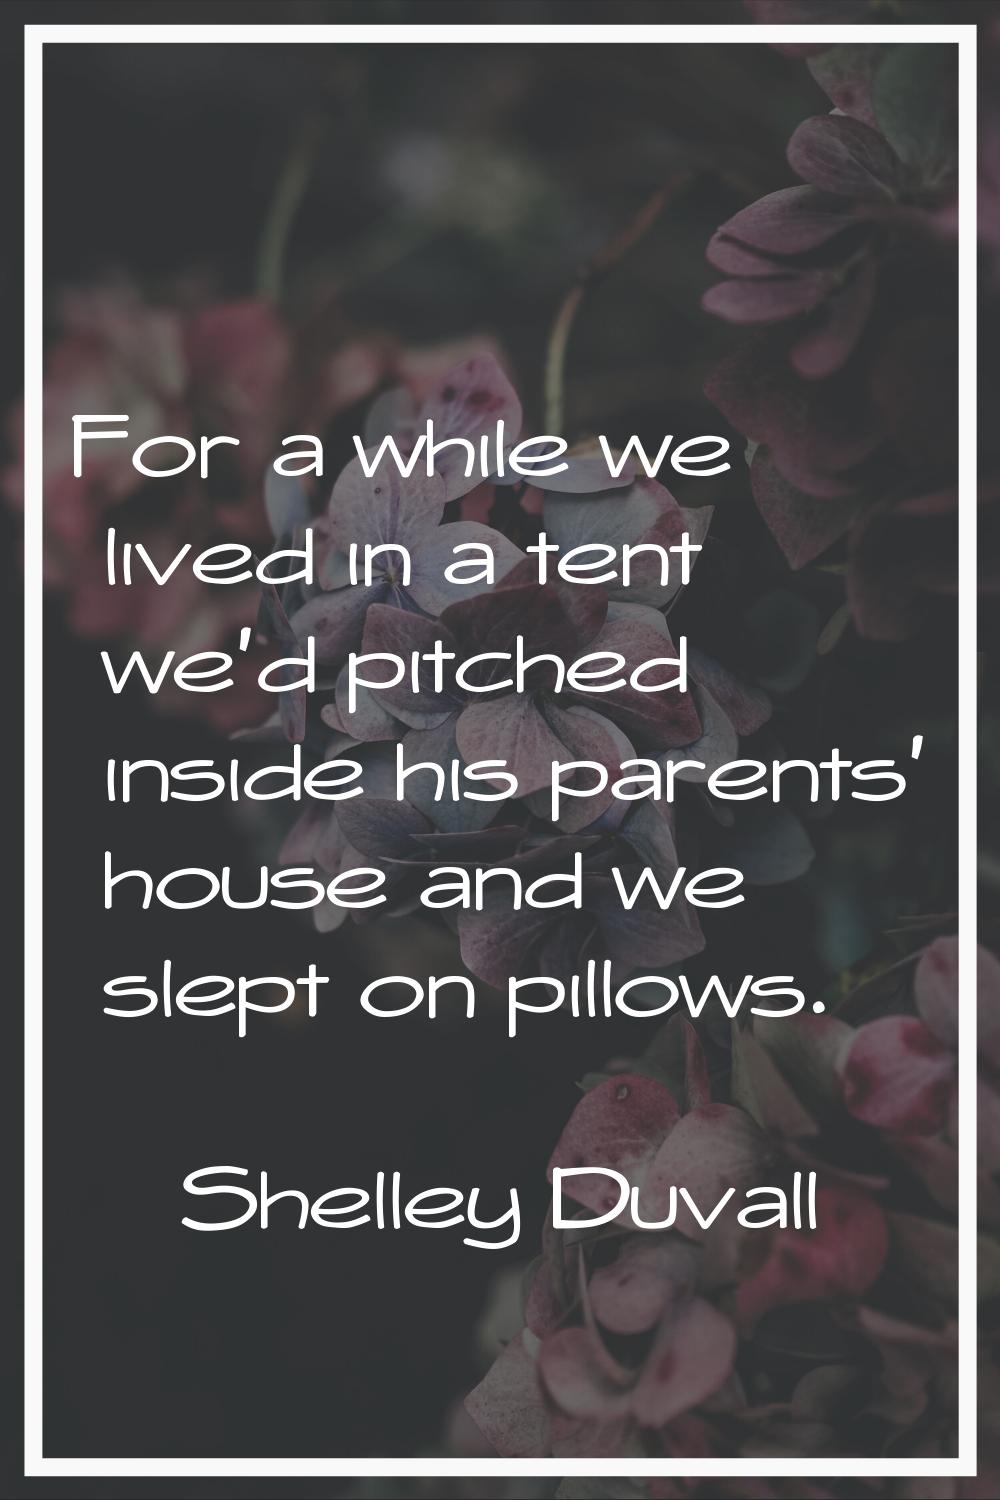 For a while we lived in a tent we'd pitched inside his parents' house and we slept on pillows.